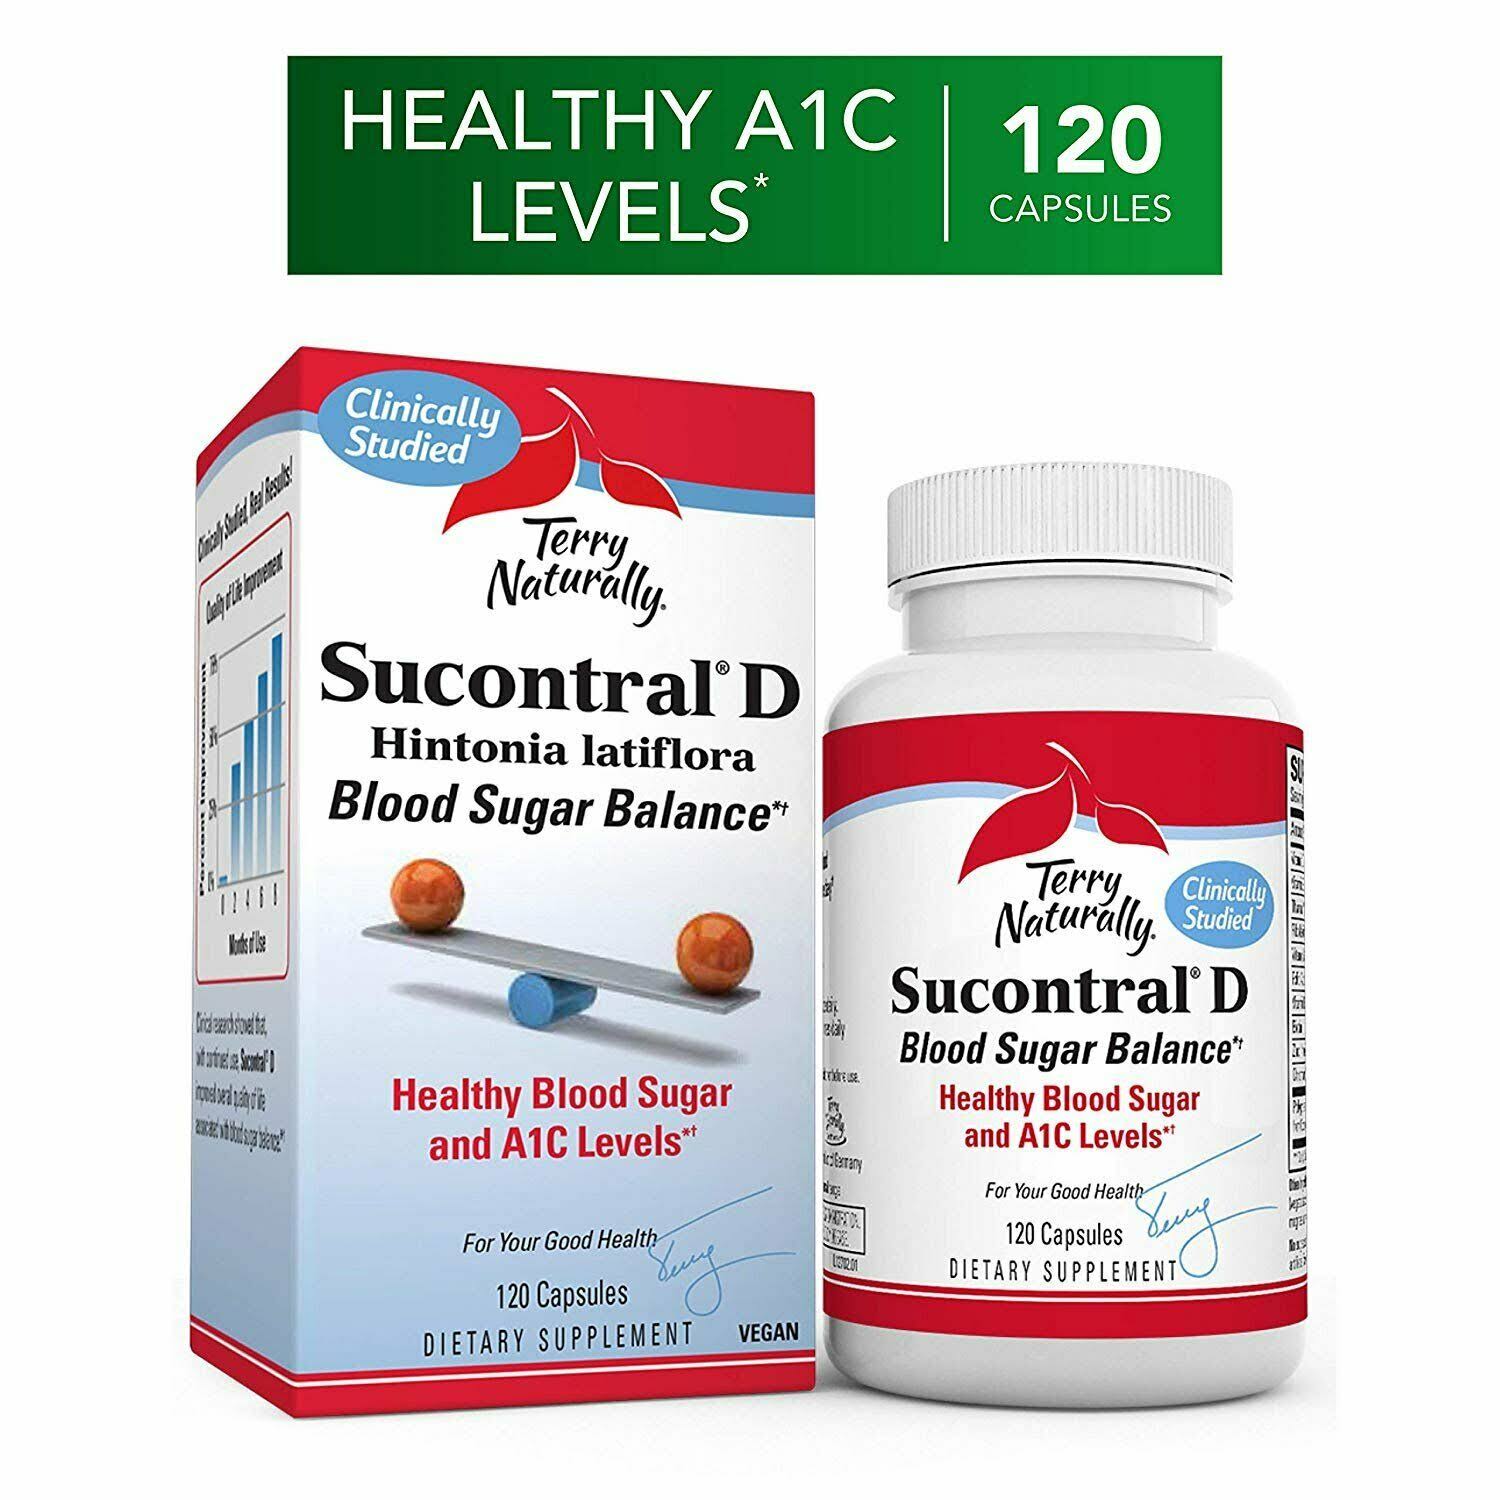 Terry Naturally Sucontral D - 120 Capsules - 100 Mg Hintonia Latiflora - Supports Carbohydrate Metabolism - Non-GMO, Gluten Free - 120 Total Servings